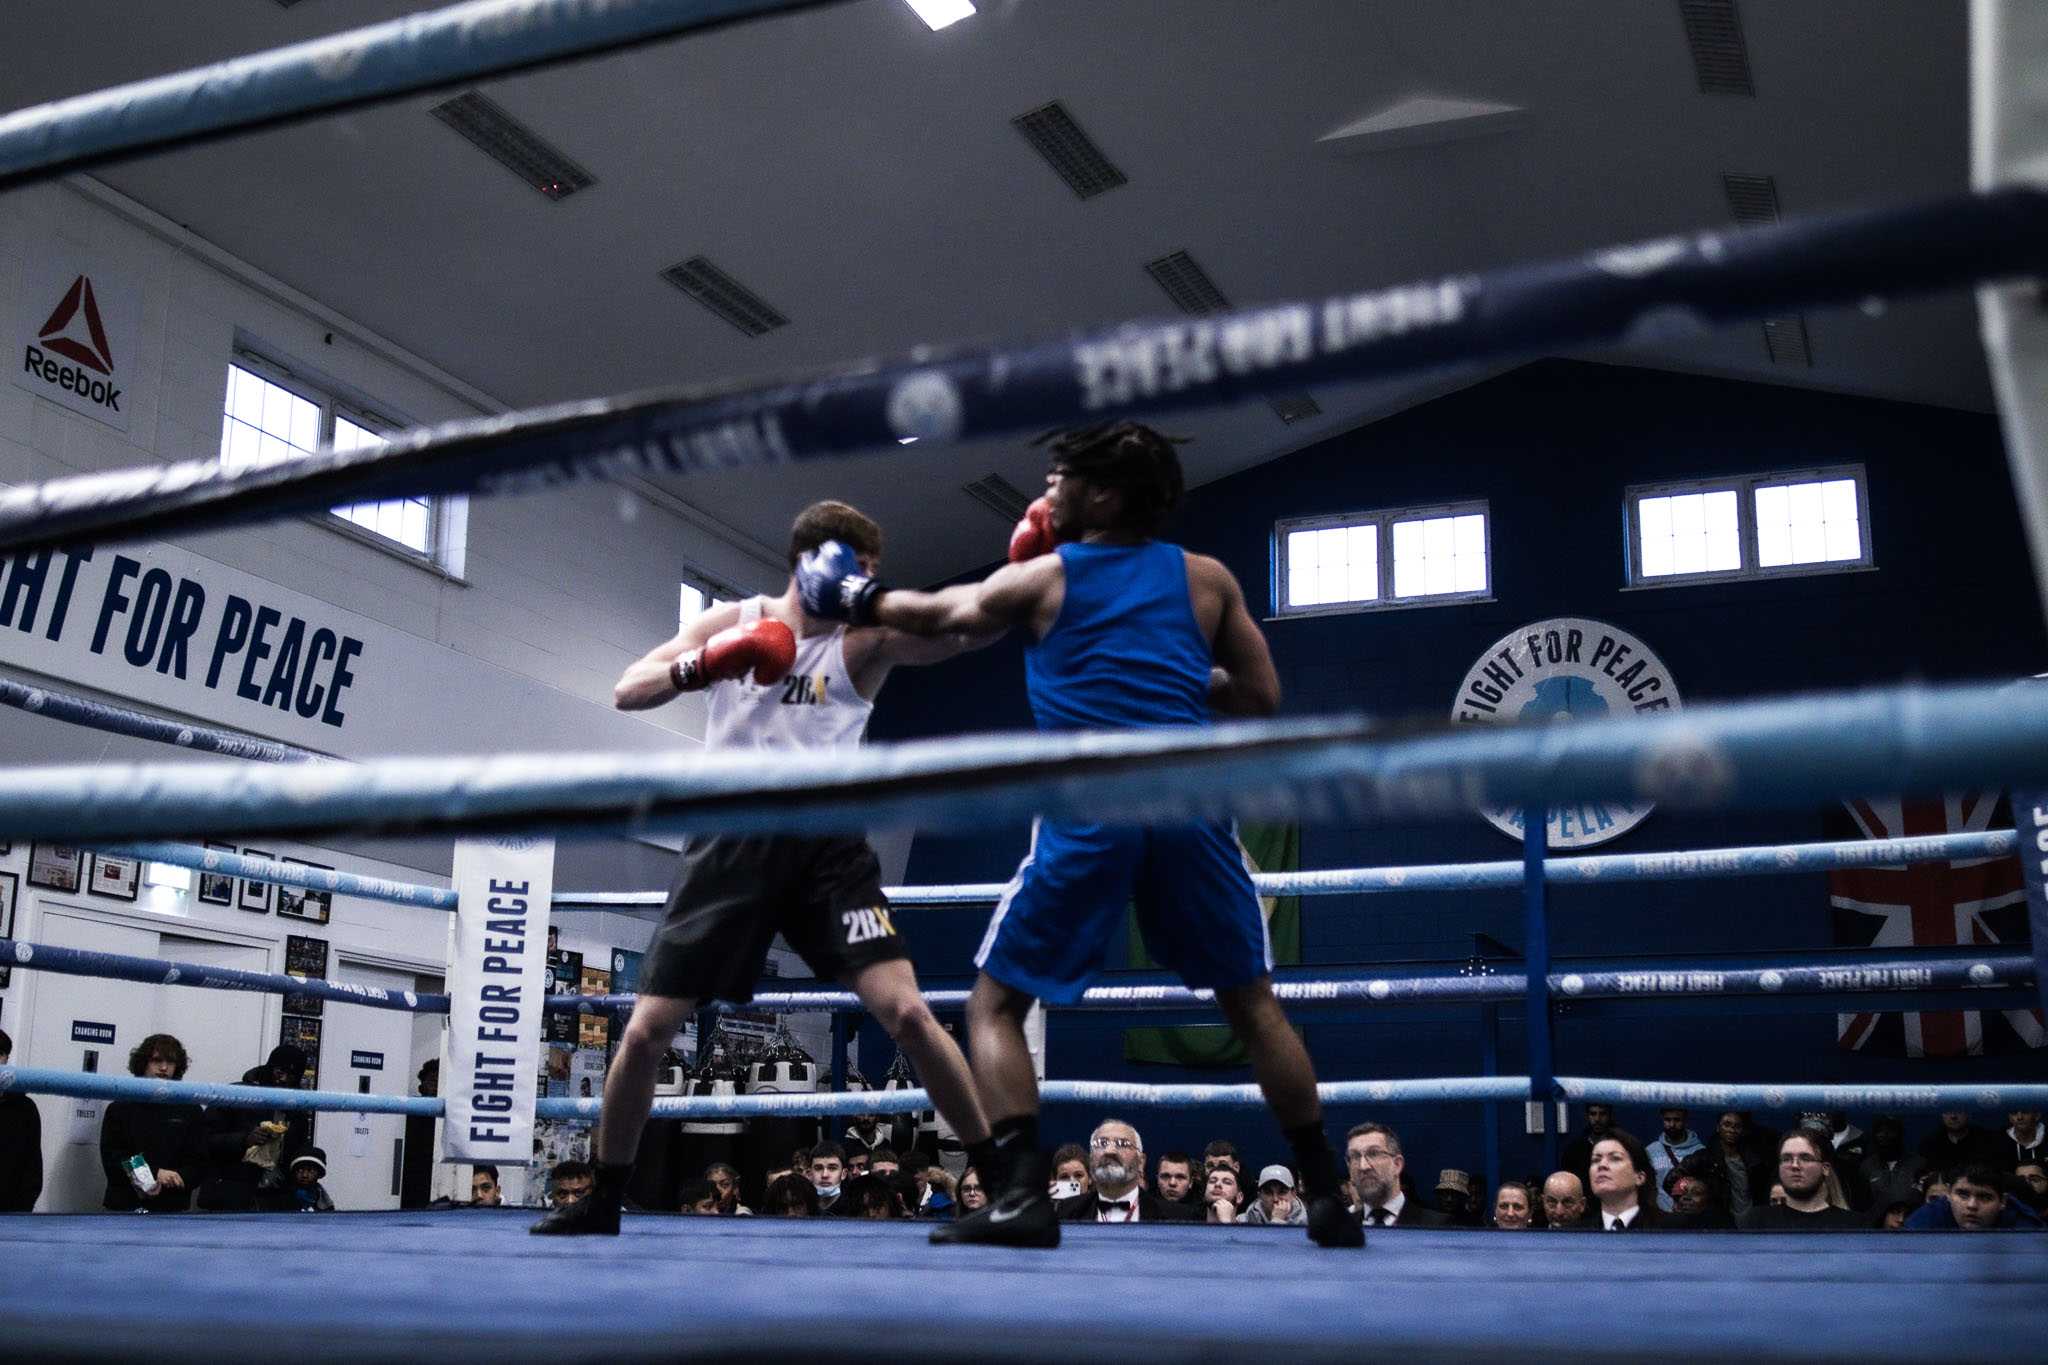 Boxing match fight for peace for Newham Heritage Month